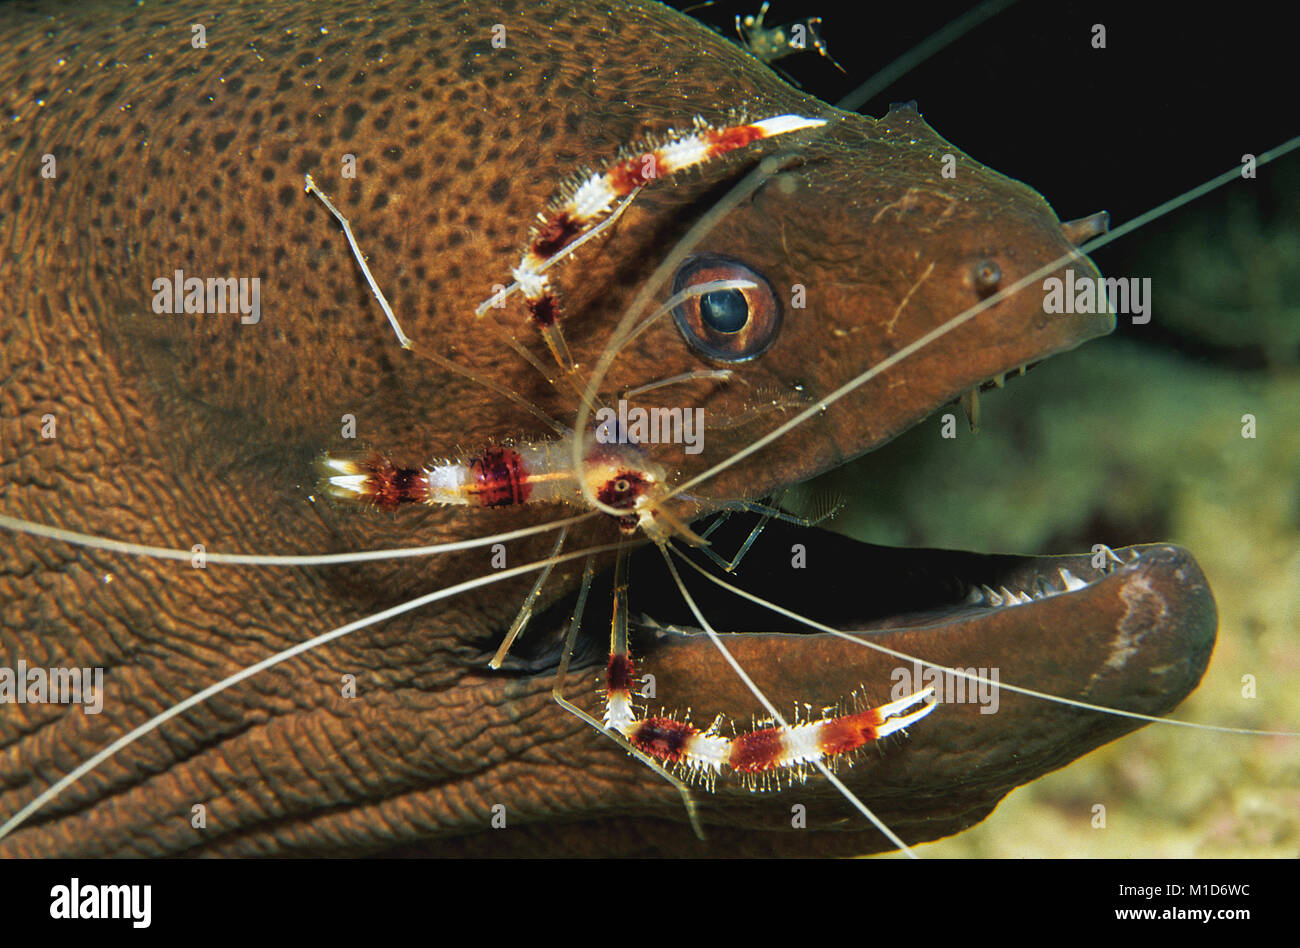 Cleaning station, Banded Coral Shrimp (Stenopus hispidus) cleans a Giant moray (Gymnothorax javanicus), Maldives islands, Indian ocean, Asia Stock Photo